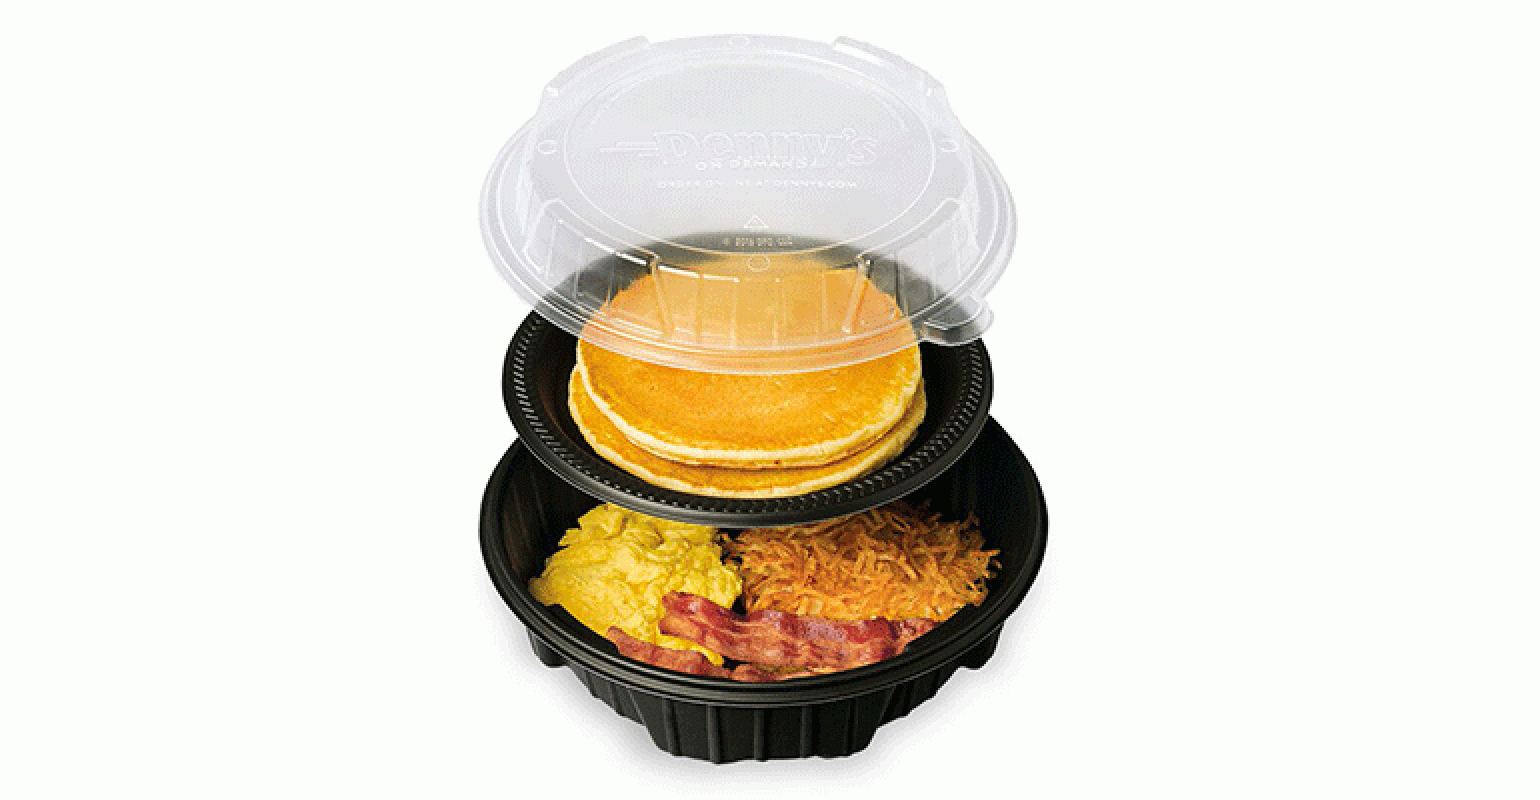 Denny's launches 24-hour delivery